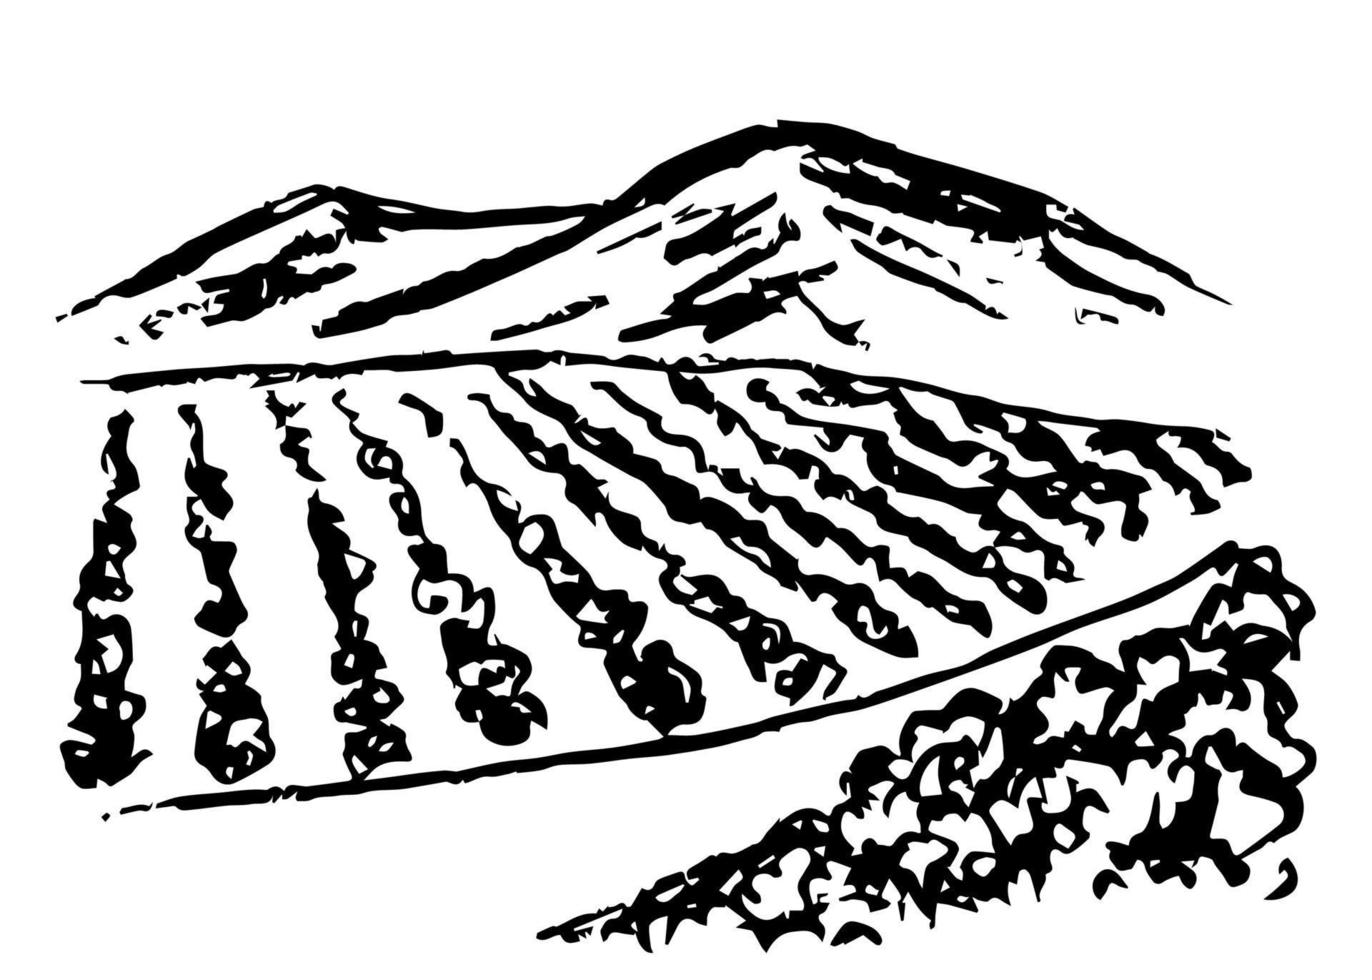 Hand drawn vector simple charcoal pencil drawing. Vineyard landscape, rows of grape bushes, perspective, rural road, outlines of mountains on the horizon. Engraving style, label printing, wine list.